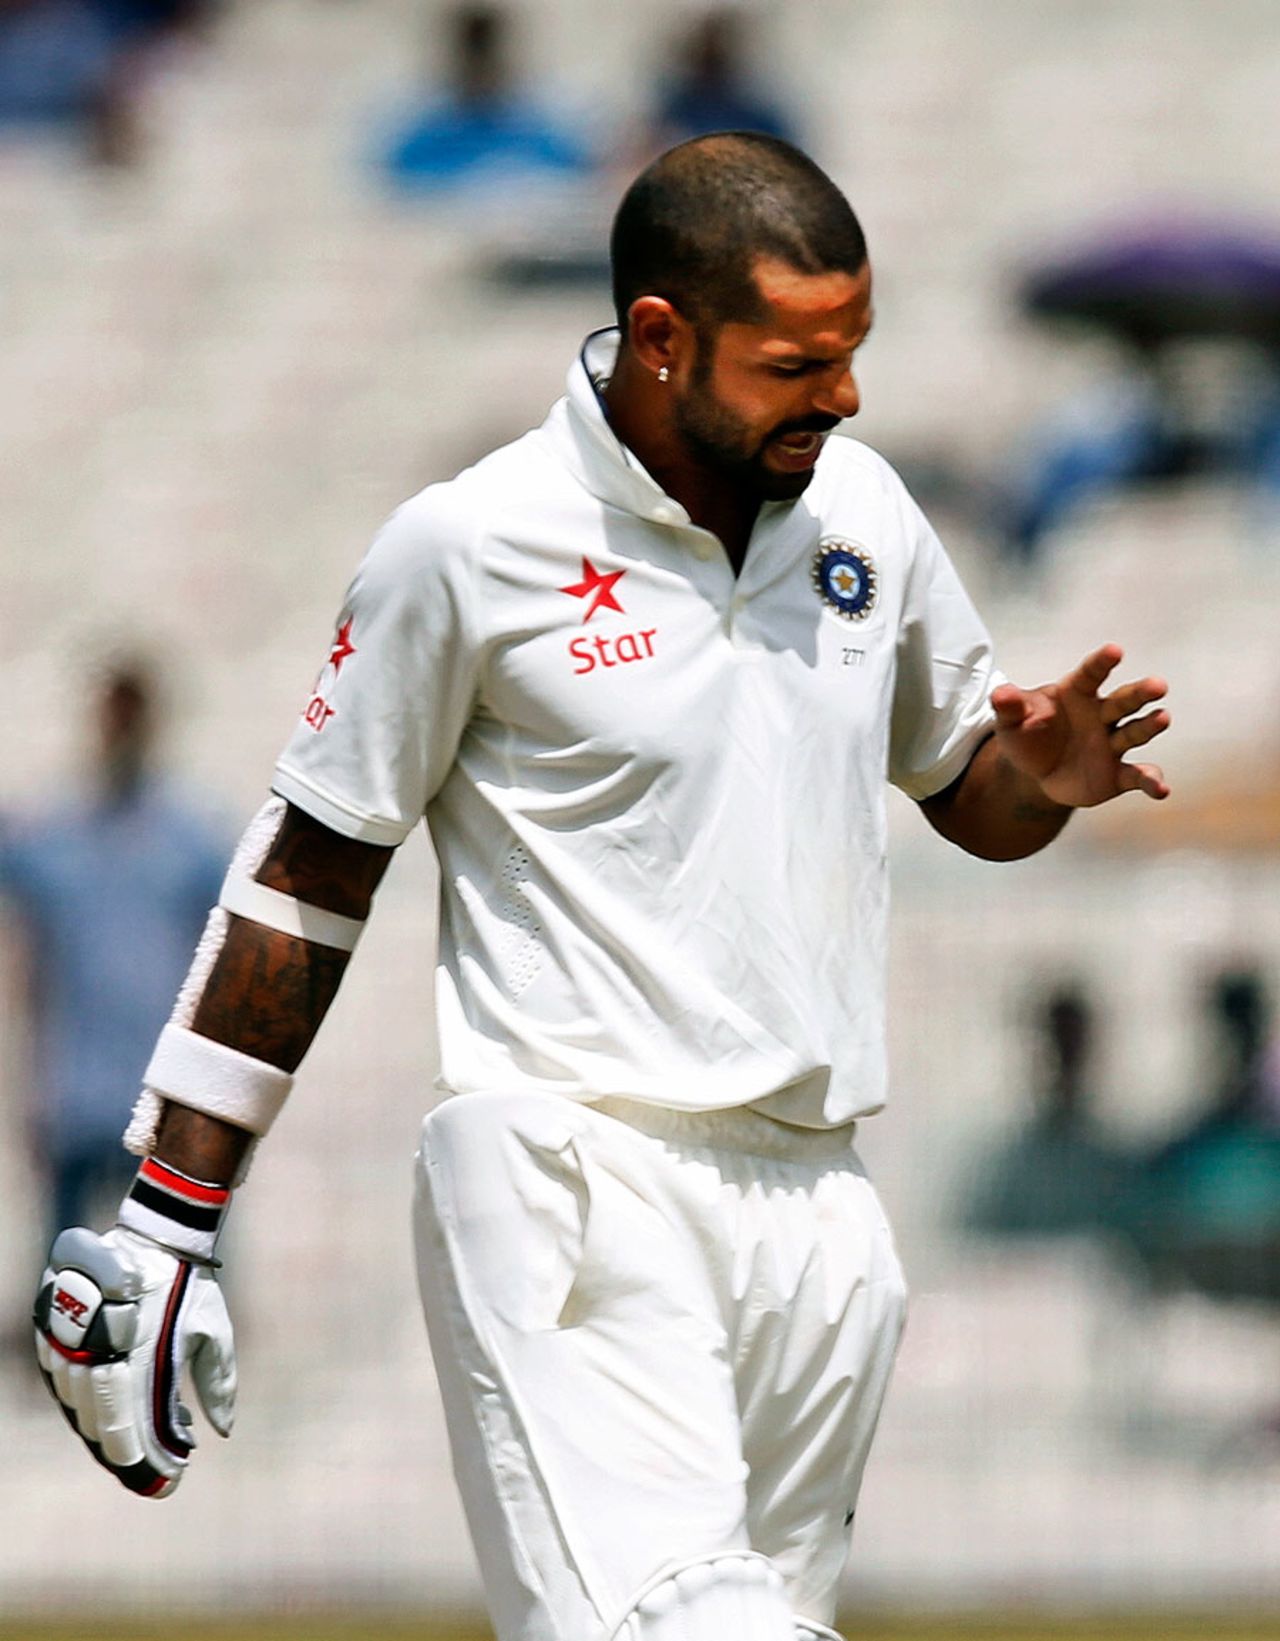 Shikhar Dhawan had his index finger jammed against the bat by a spitting delivery from Trent Boult, India v New Zealand, 2nd Test, Kolkata, 3rd day, October 2, 2016